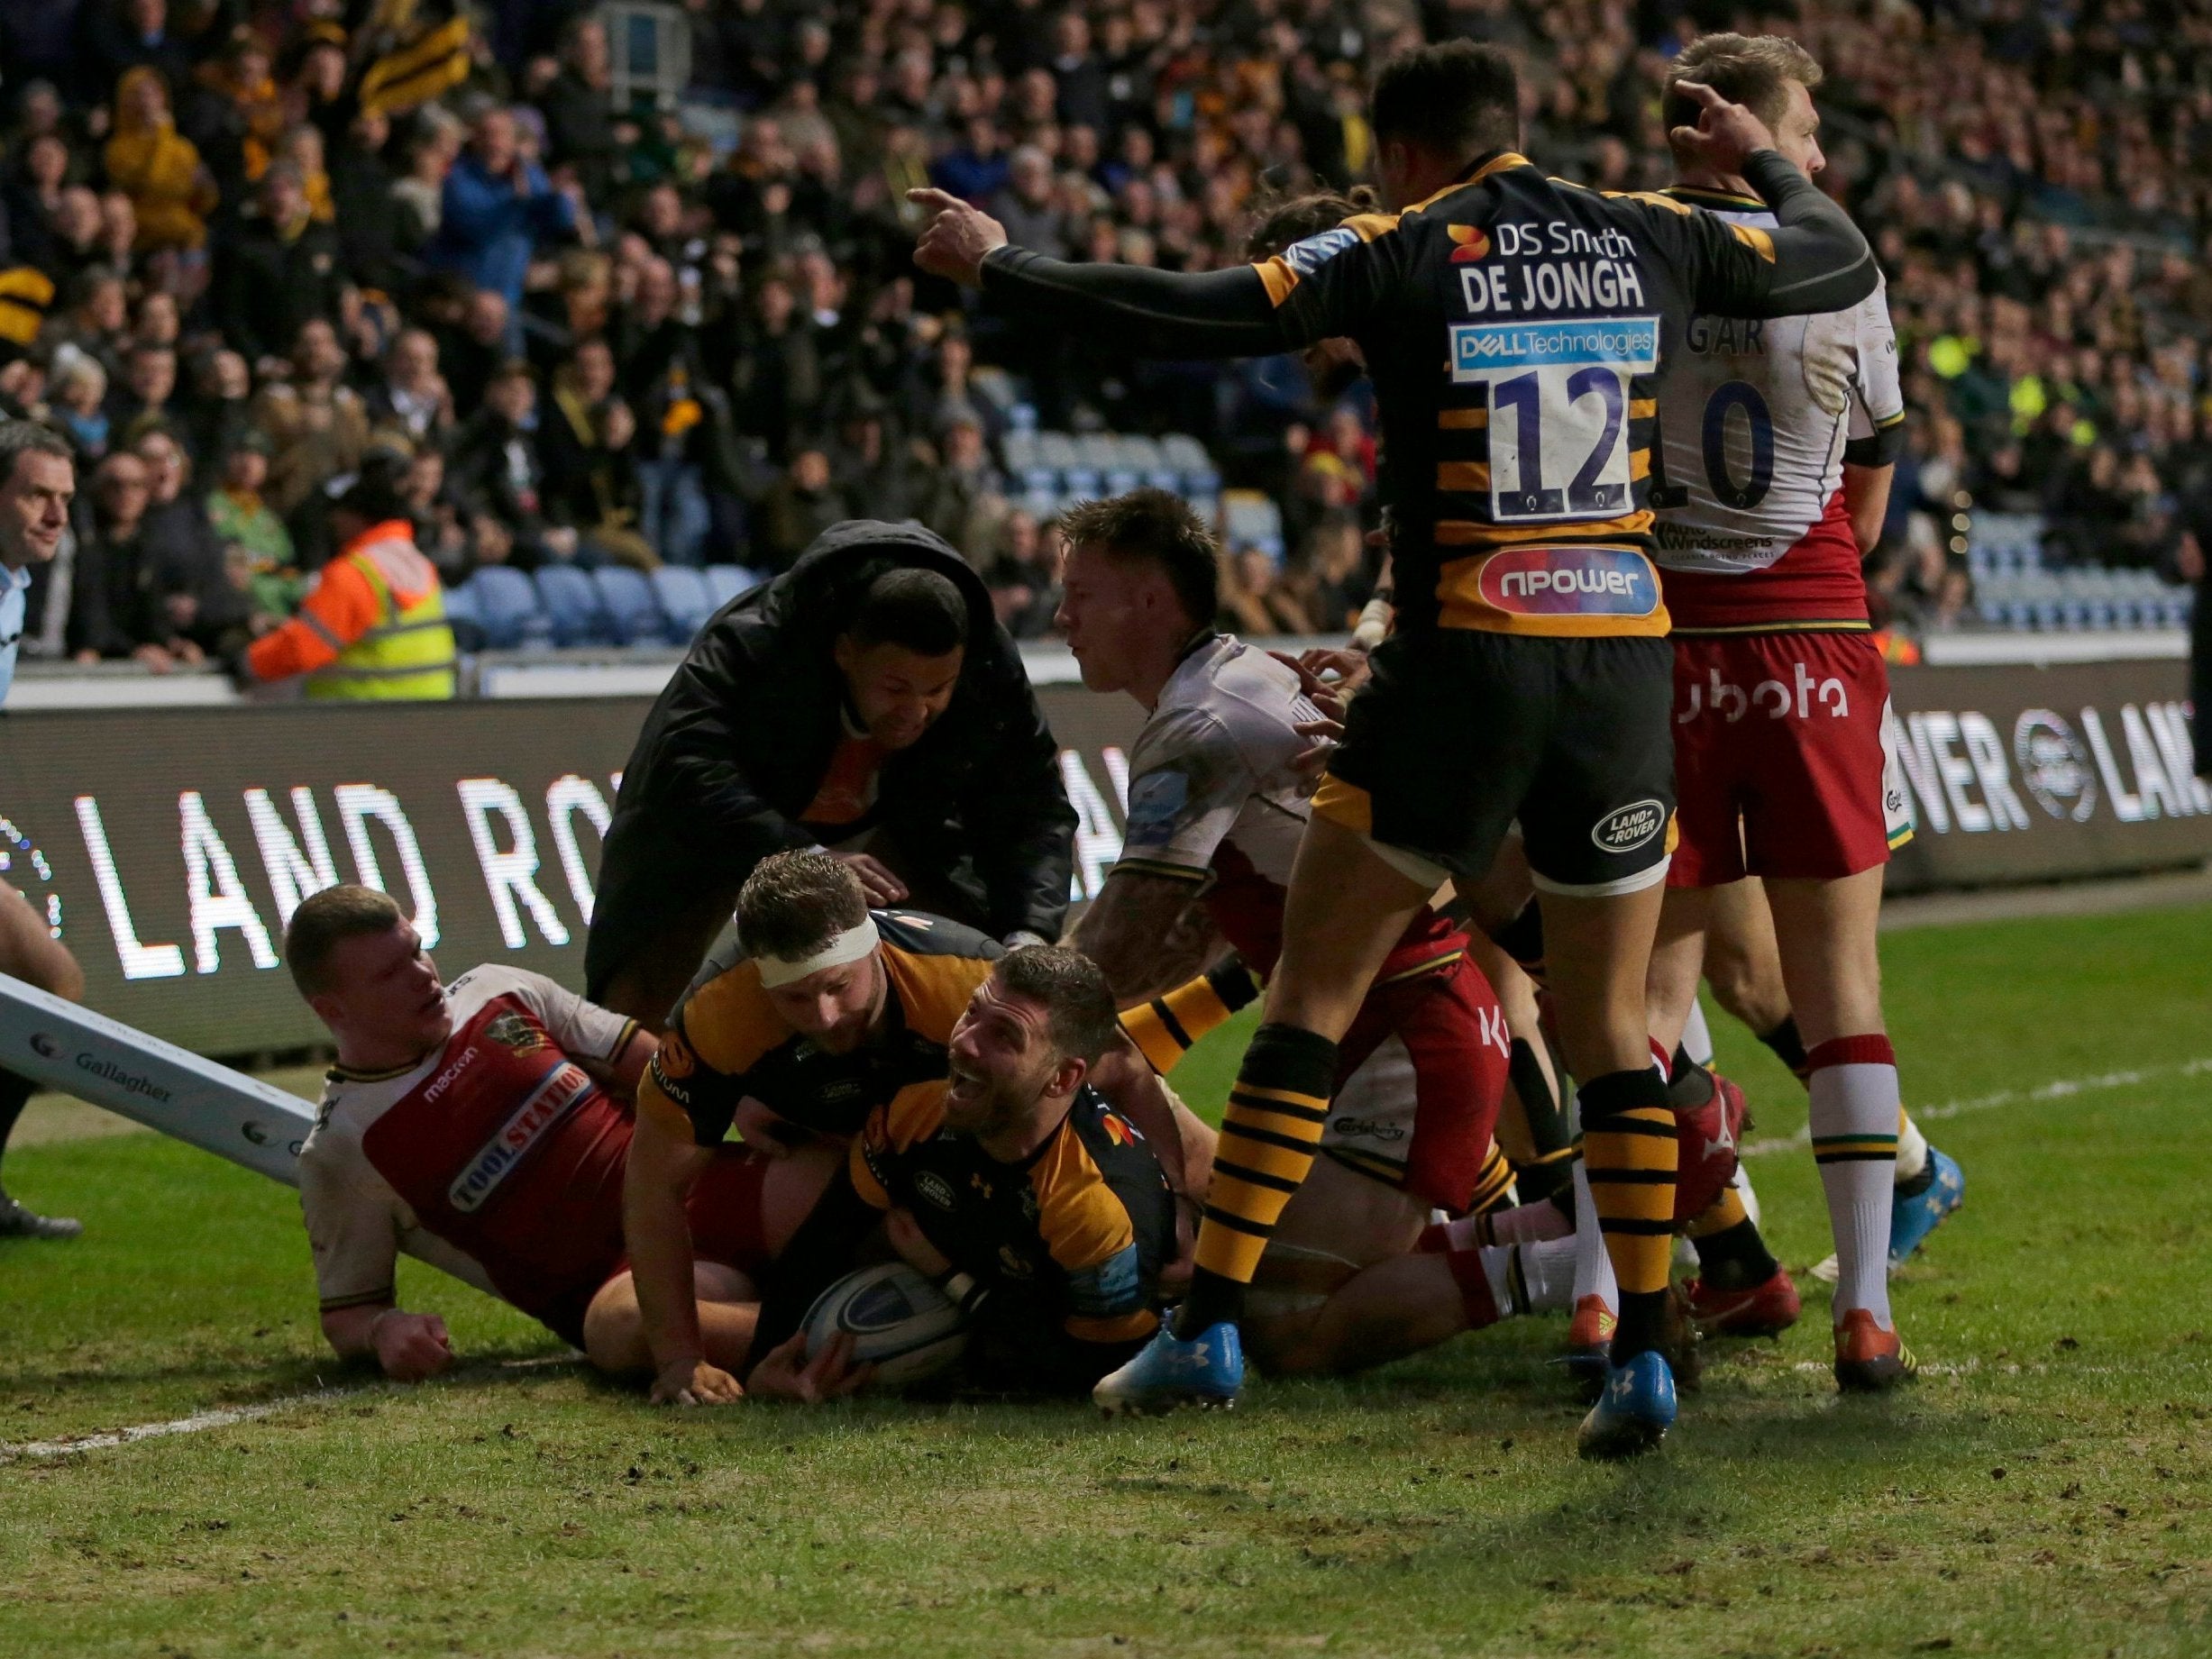 Wasps have added to their single win in their last 13 matches